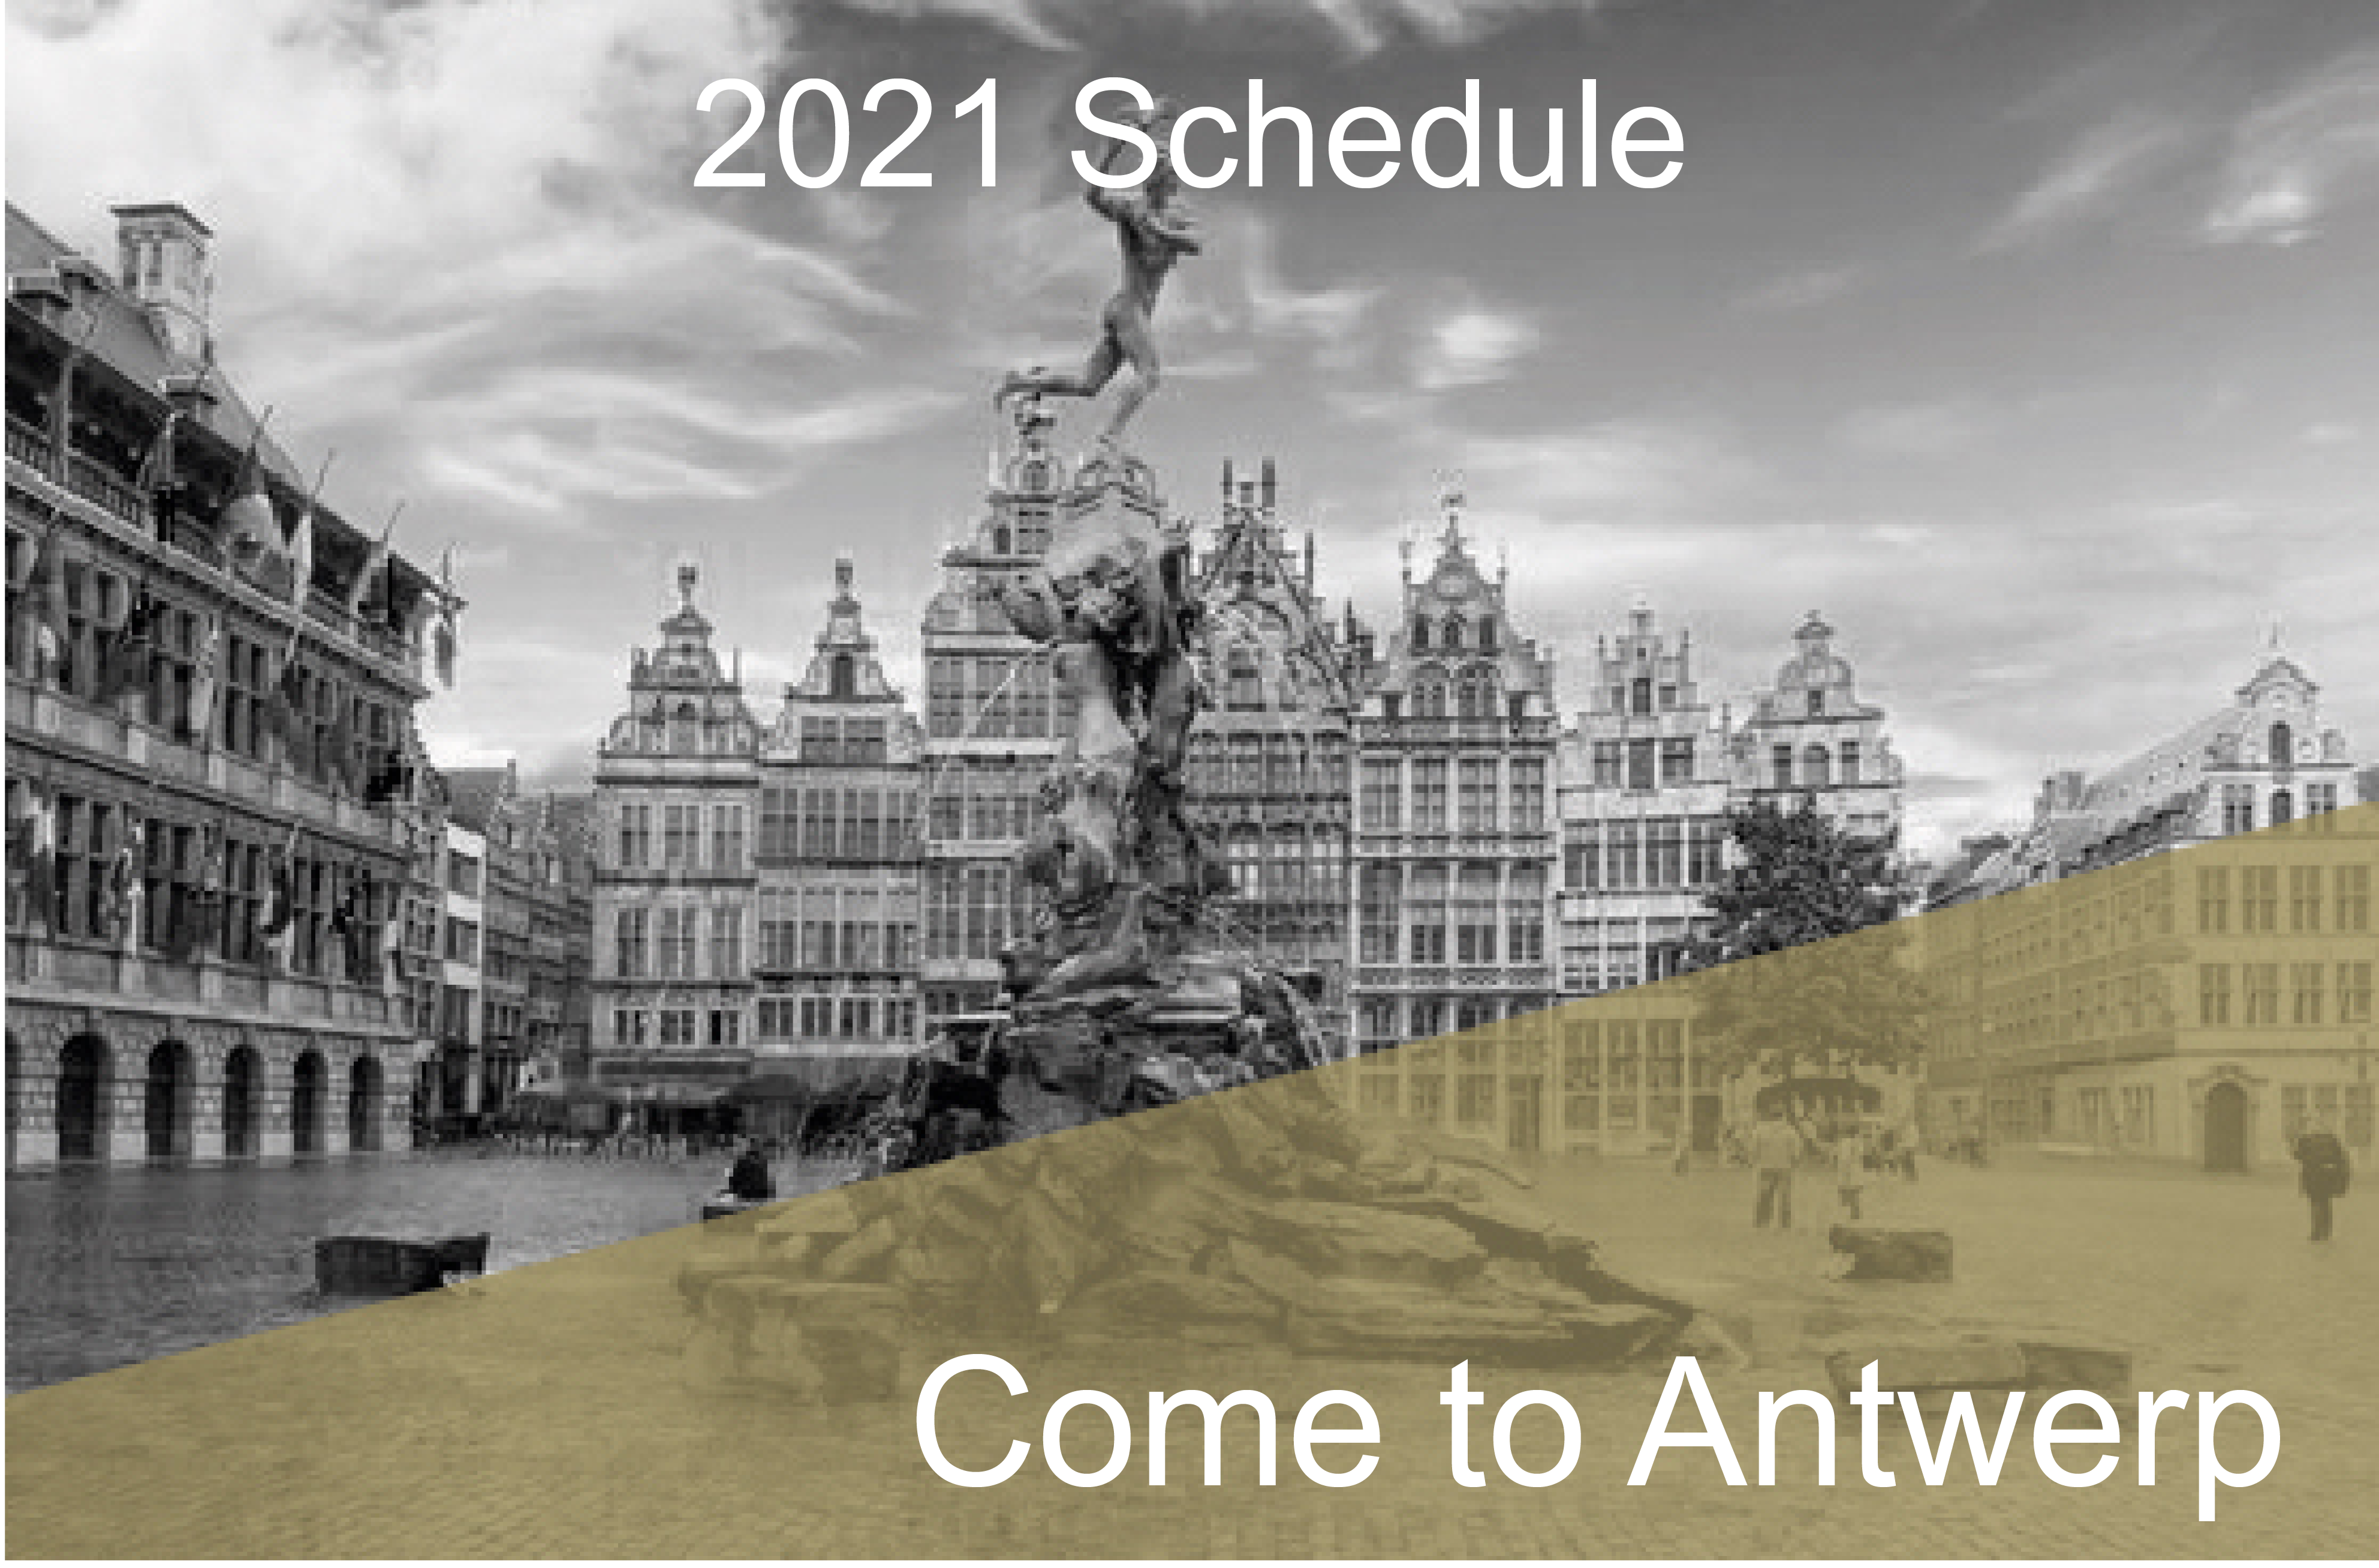 Come to Antwerp